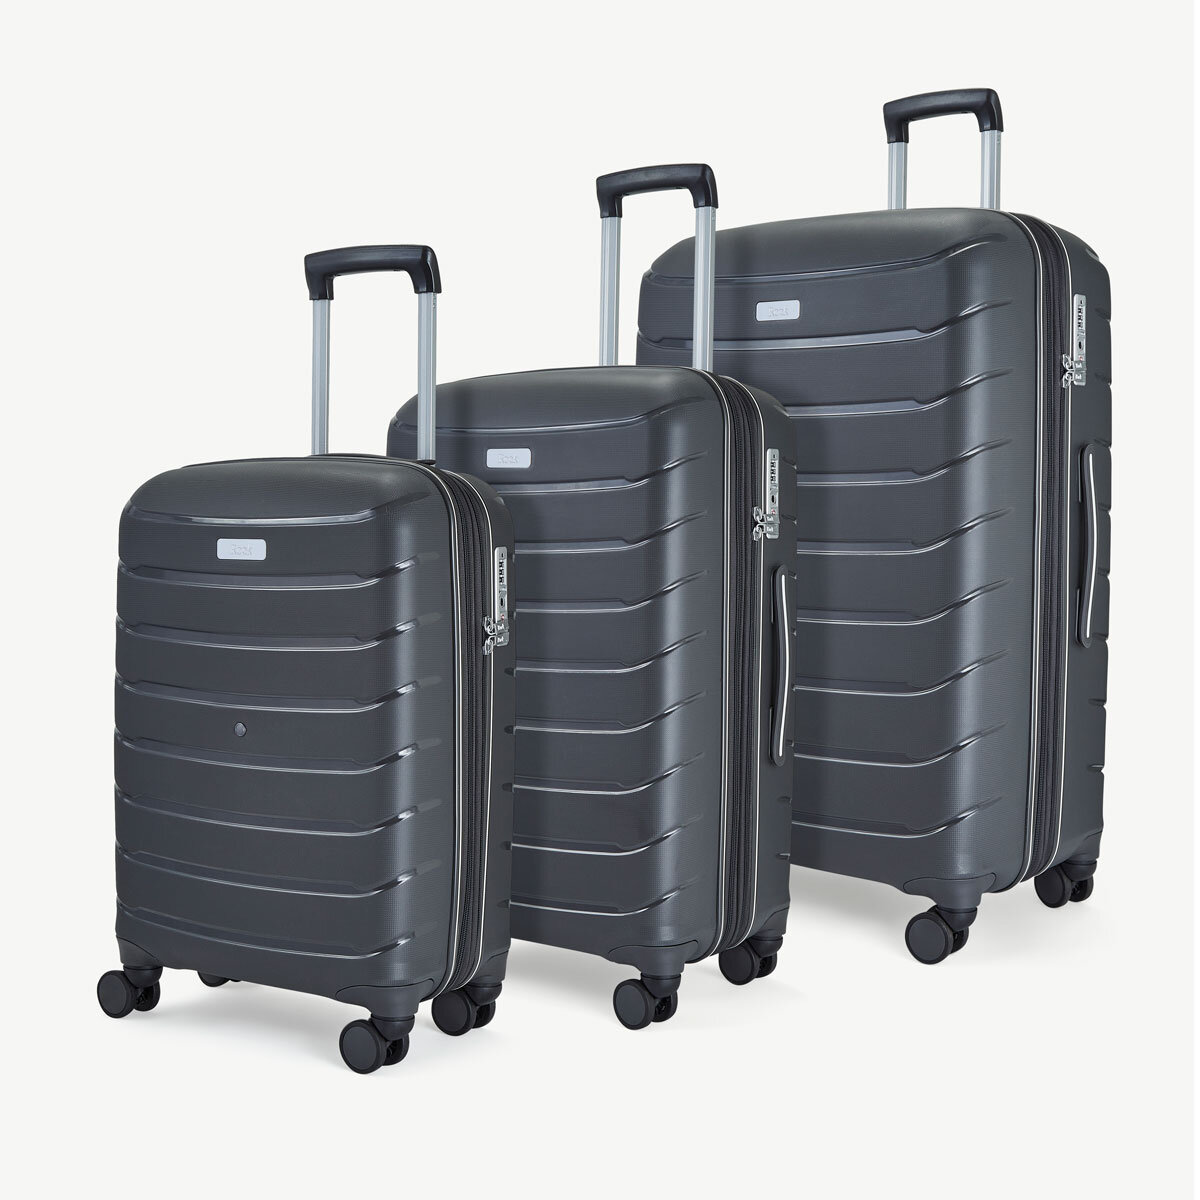 Rock Prime 3 Piece Hardside Luggage Set in Charcoal | Cos...